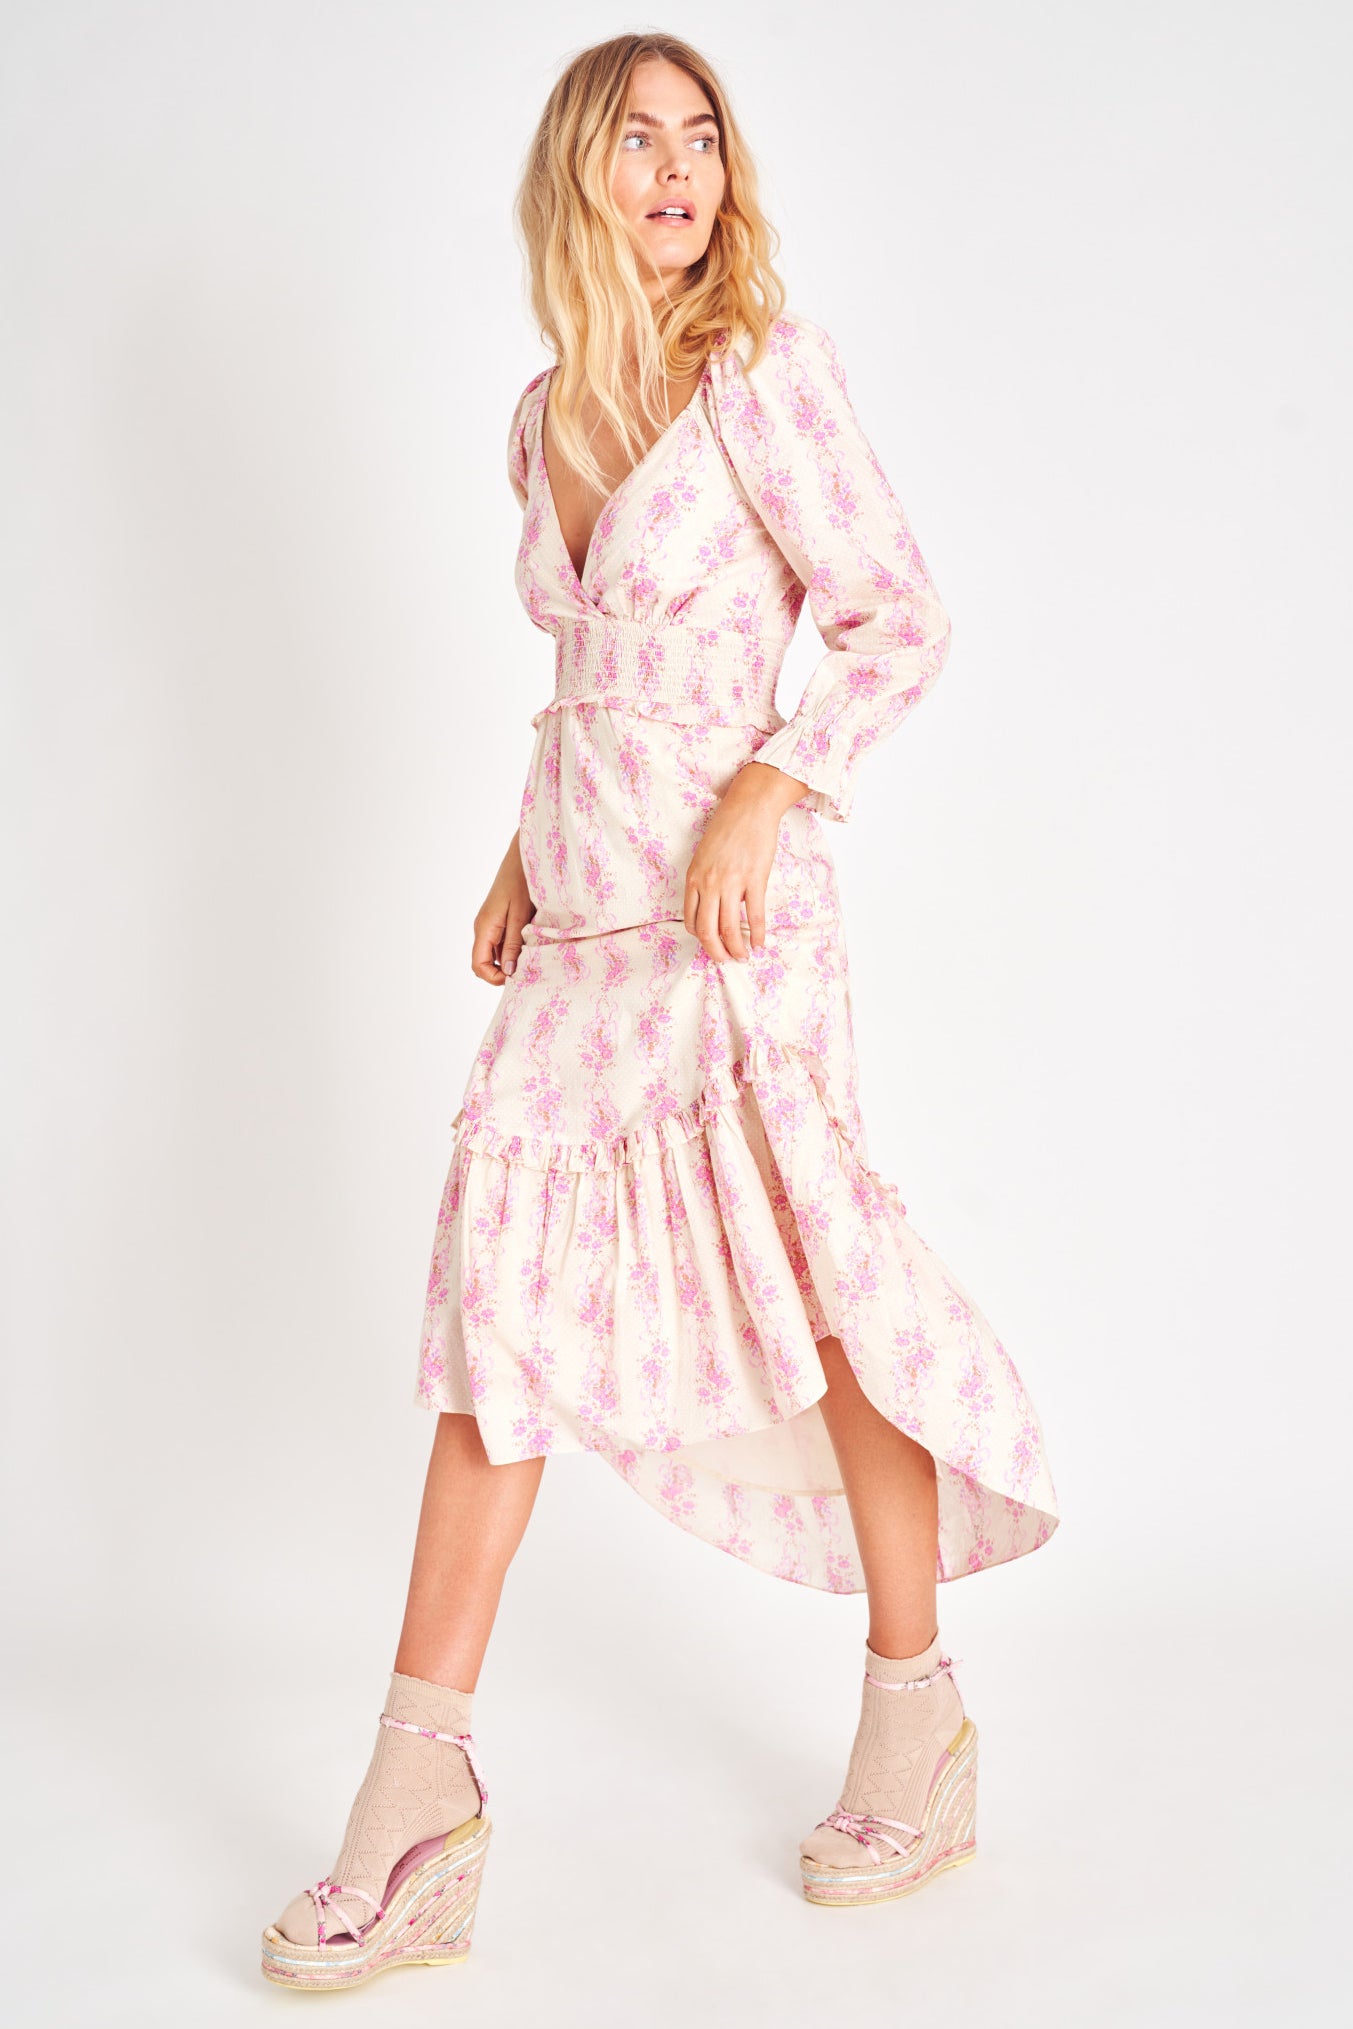 Long sleeve pink floral plunging v neck midi dress with smocked waist.